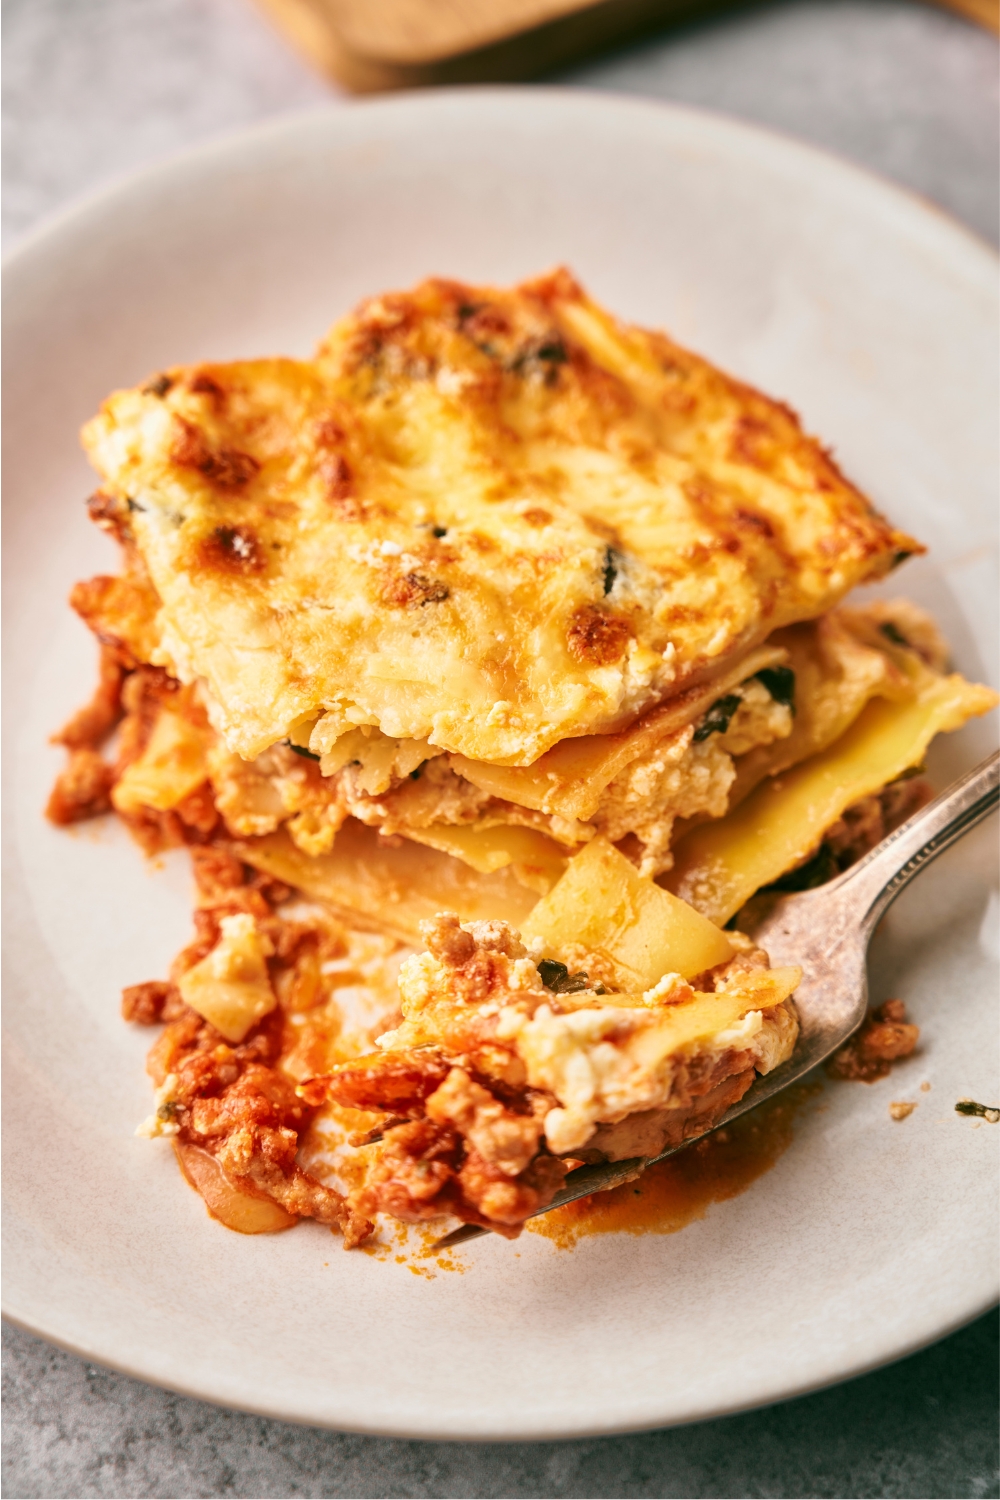 A square of beef lasagna on a white plate with a fork with some of the lasagna in front of it.